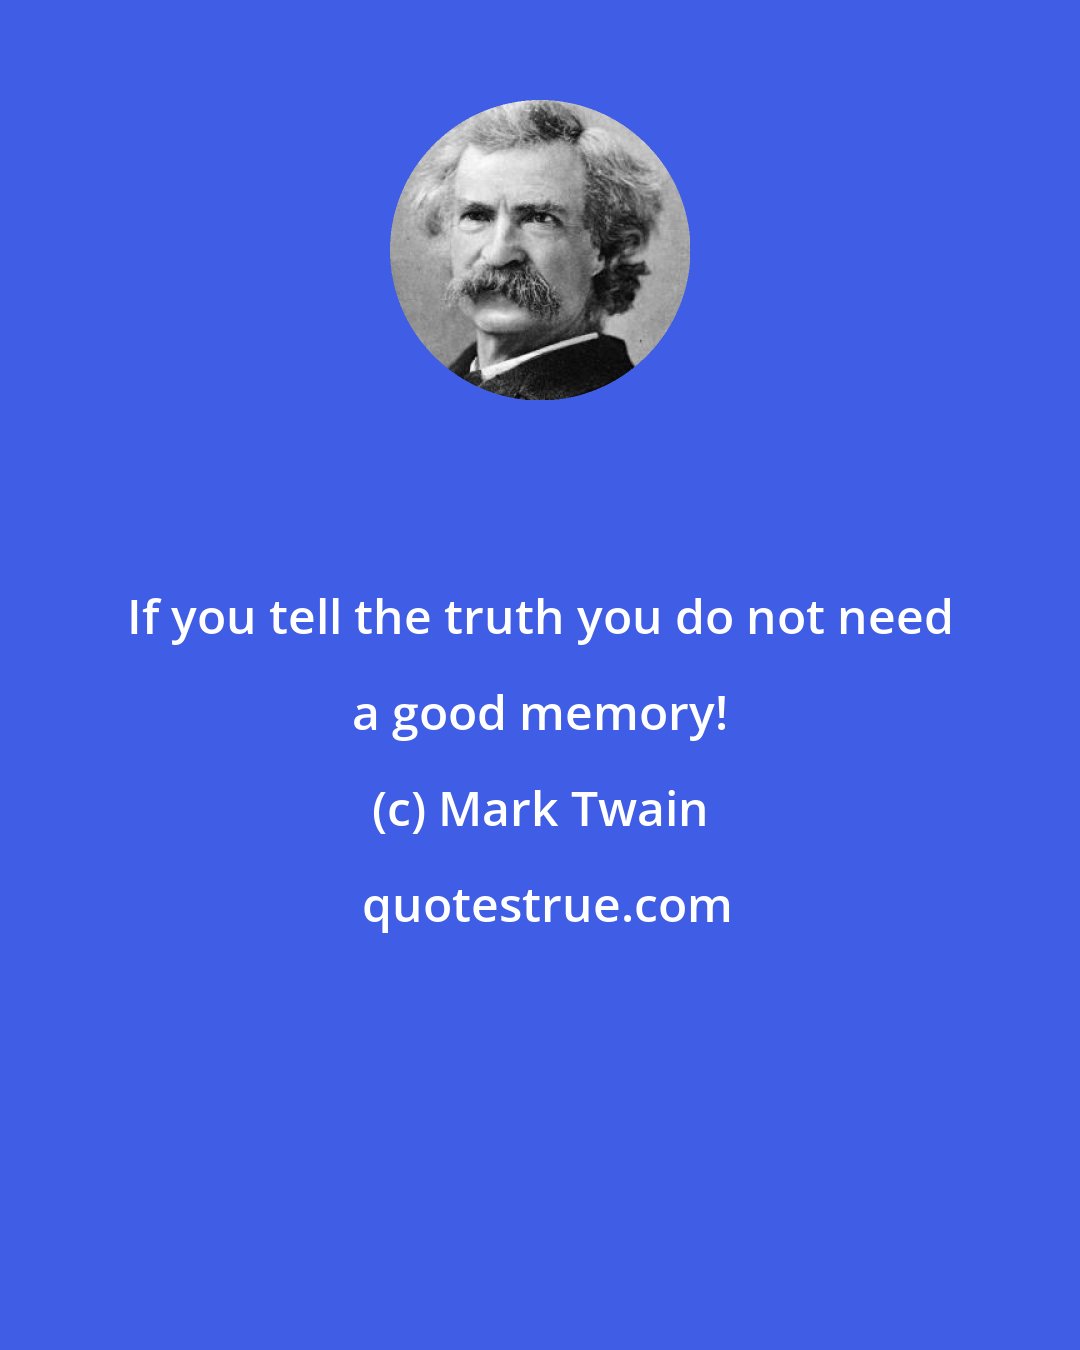 Mark Twain: If you tell the truth you do not need a good memory!